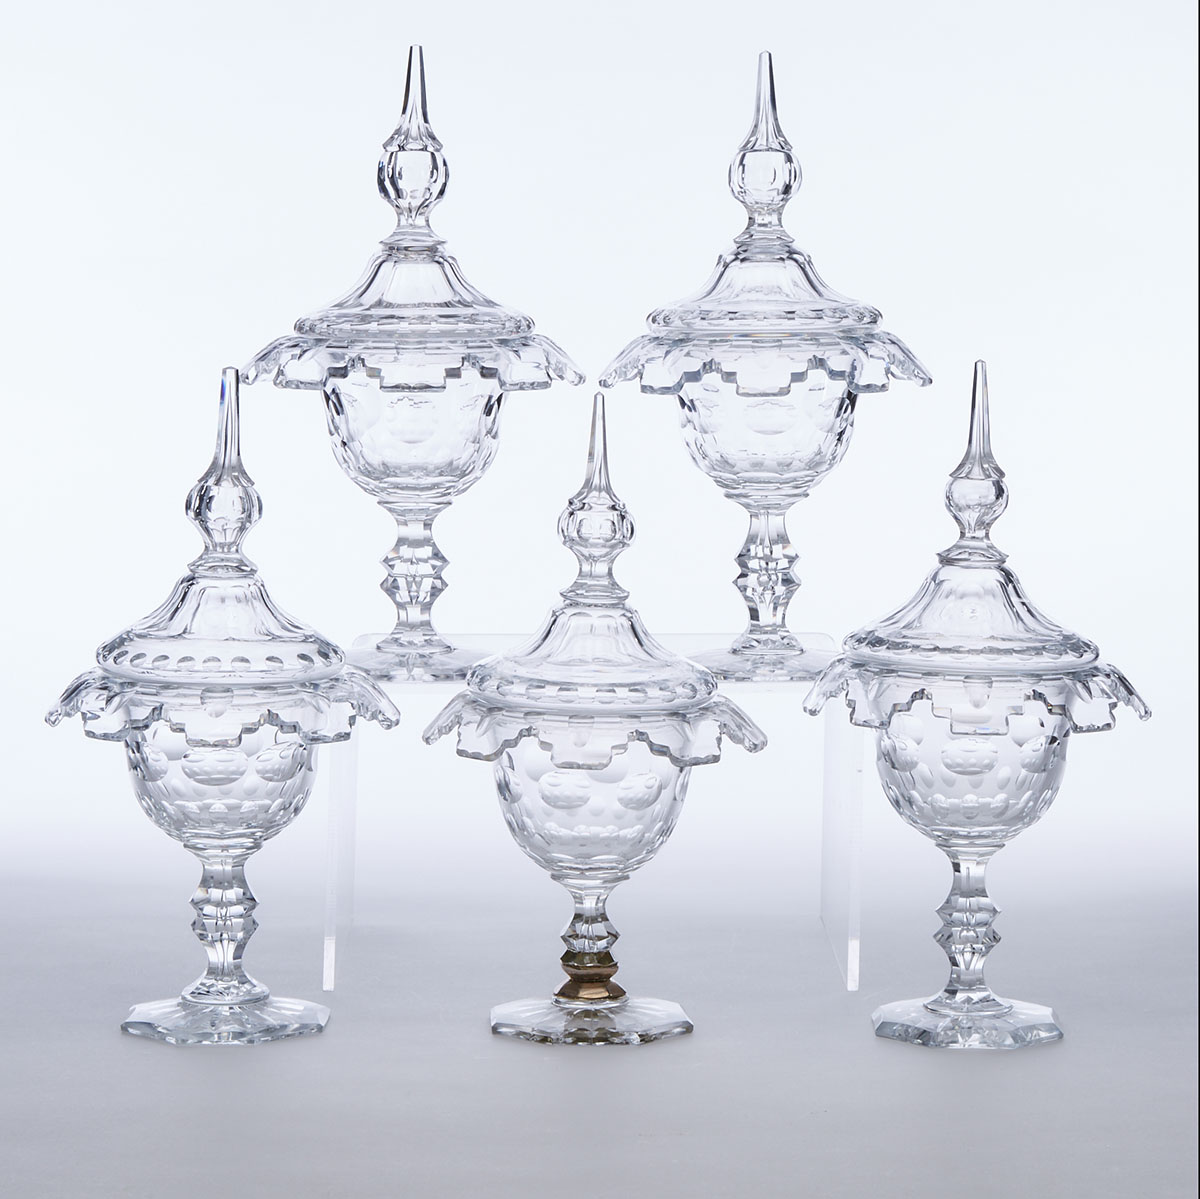 Set of Five Continental Cut Glass Sweetmeat Vases and Covers, late 19th century